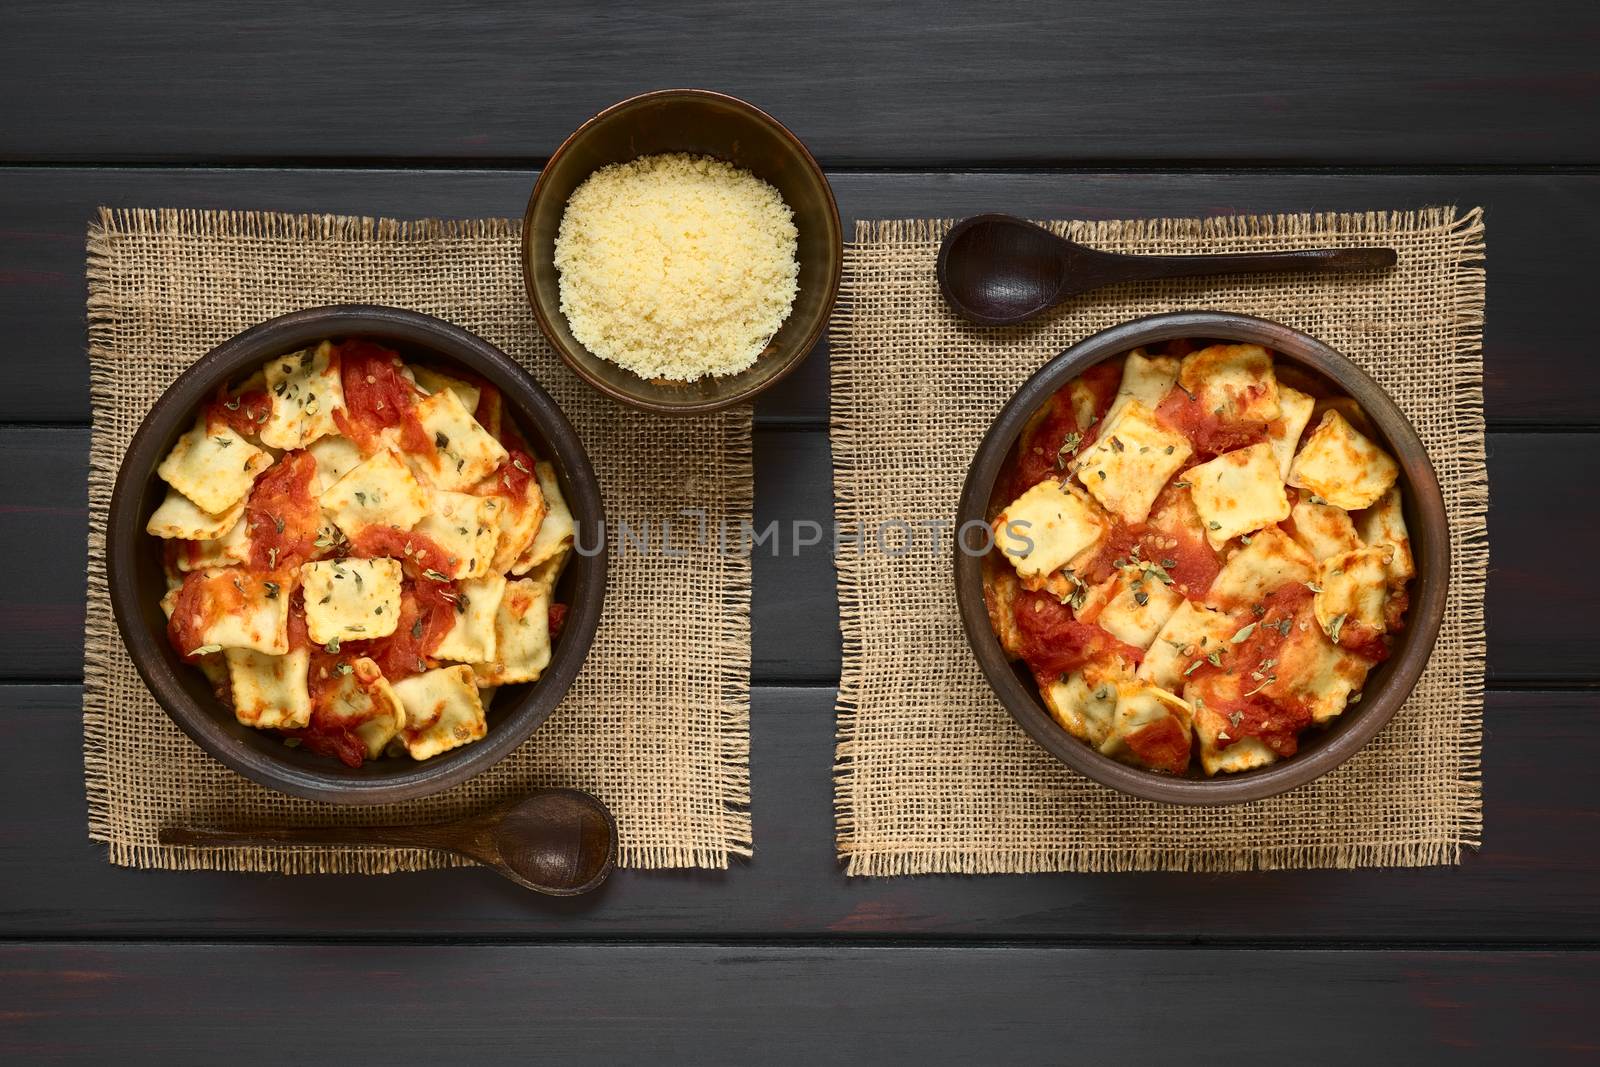 Baked ravioli with homemade tomato sauce in rustic bowls with grated cheese and wooden spoons on the side, photographed overhead on dark wood with natural light